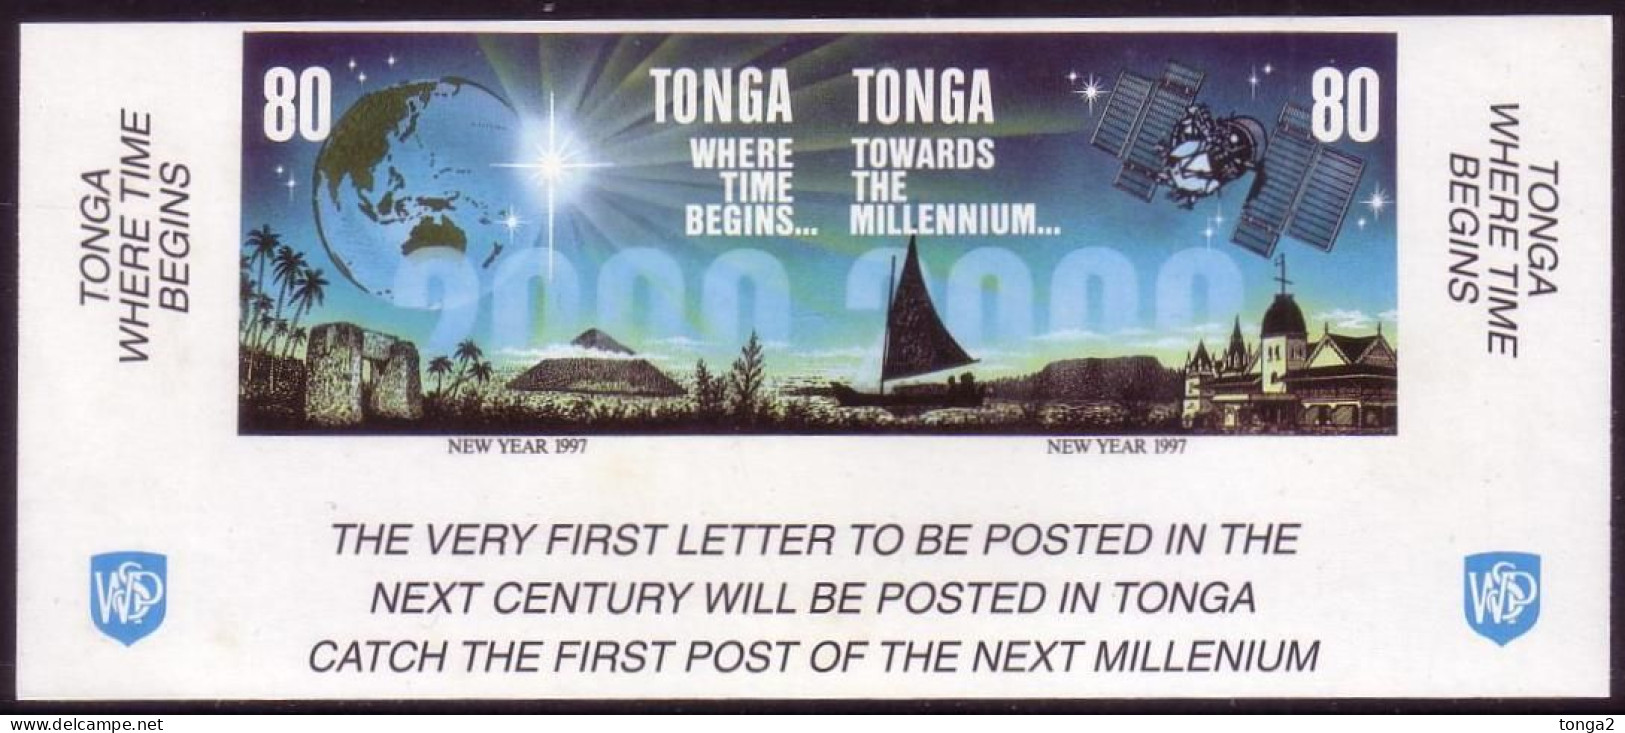 Tonga 1996 Towards 2000 Imperf Plate Proof Strip Pyramid Map Globe Trilithon - Only 12 Like This Exist - Ozeanien